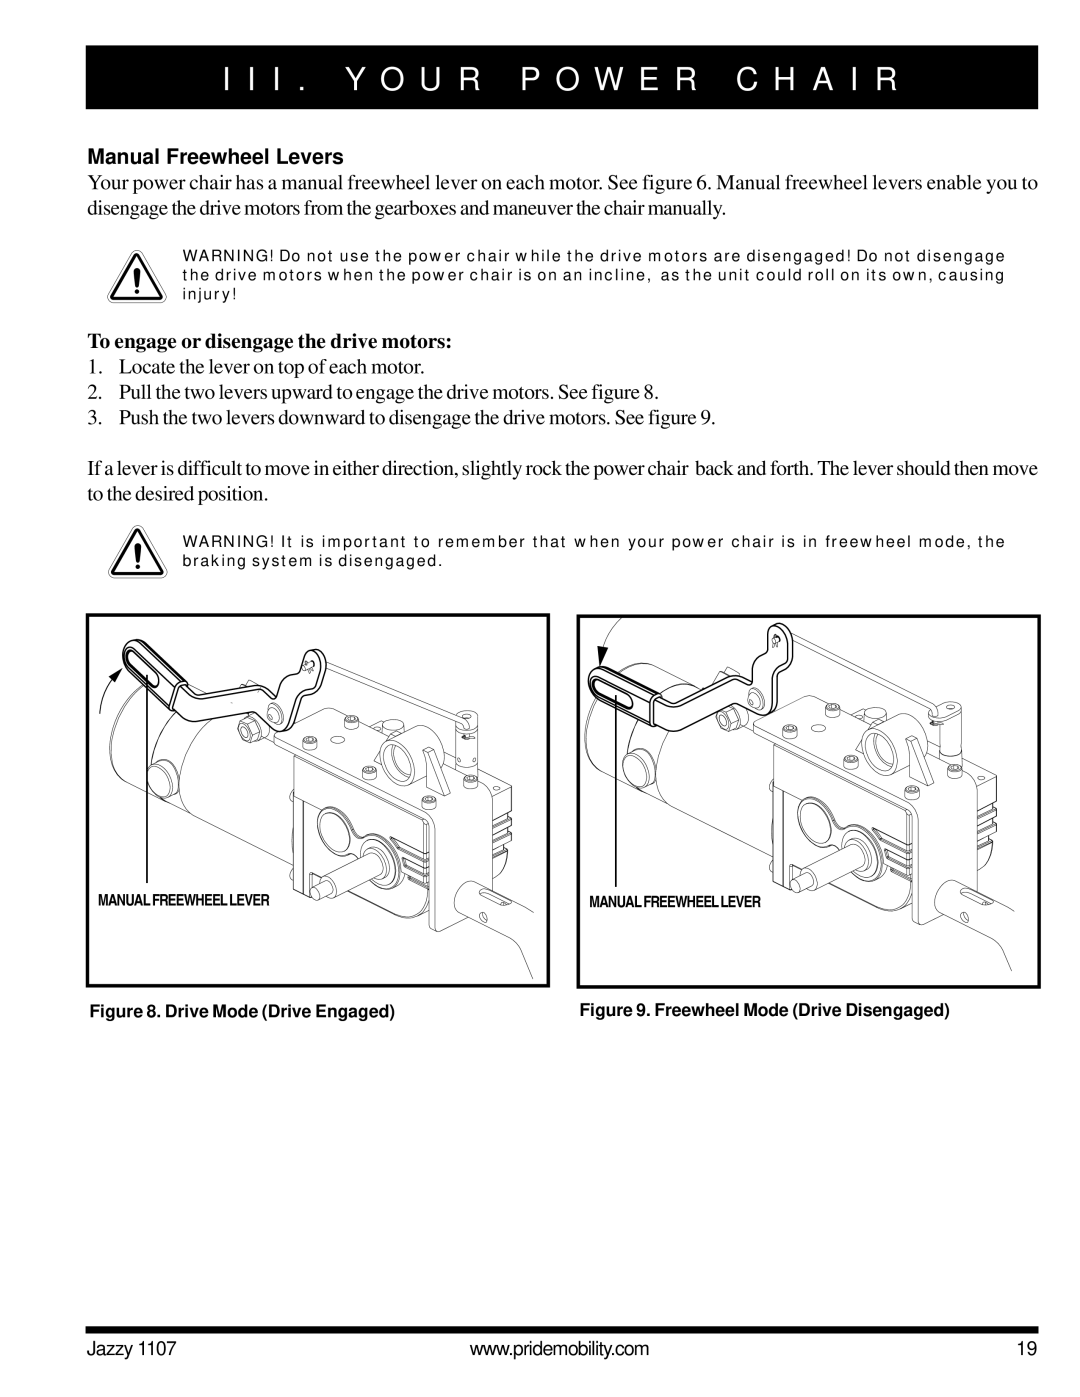 Pride Mobility 1107 owner manual Manual Freewheel Levers, To engage or disengage the drive motors 